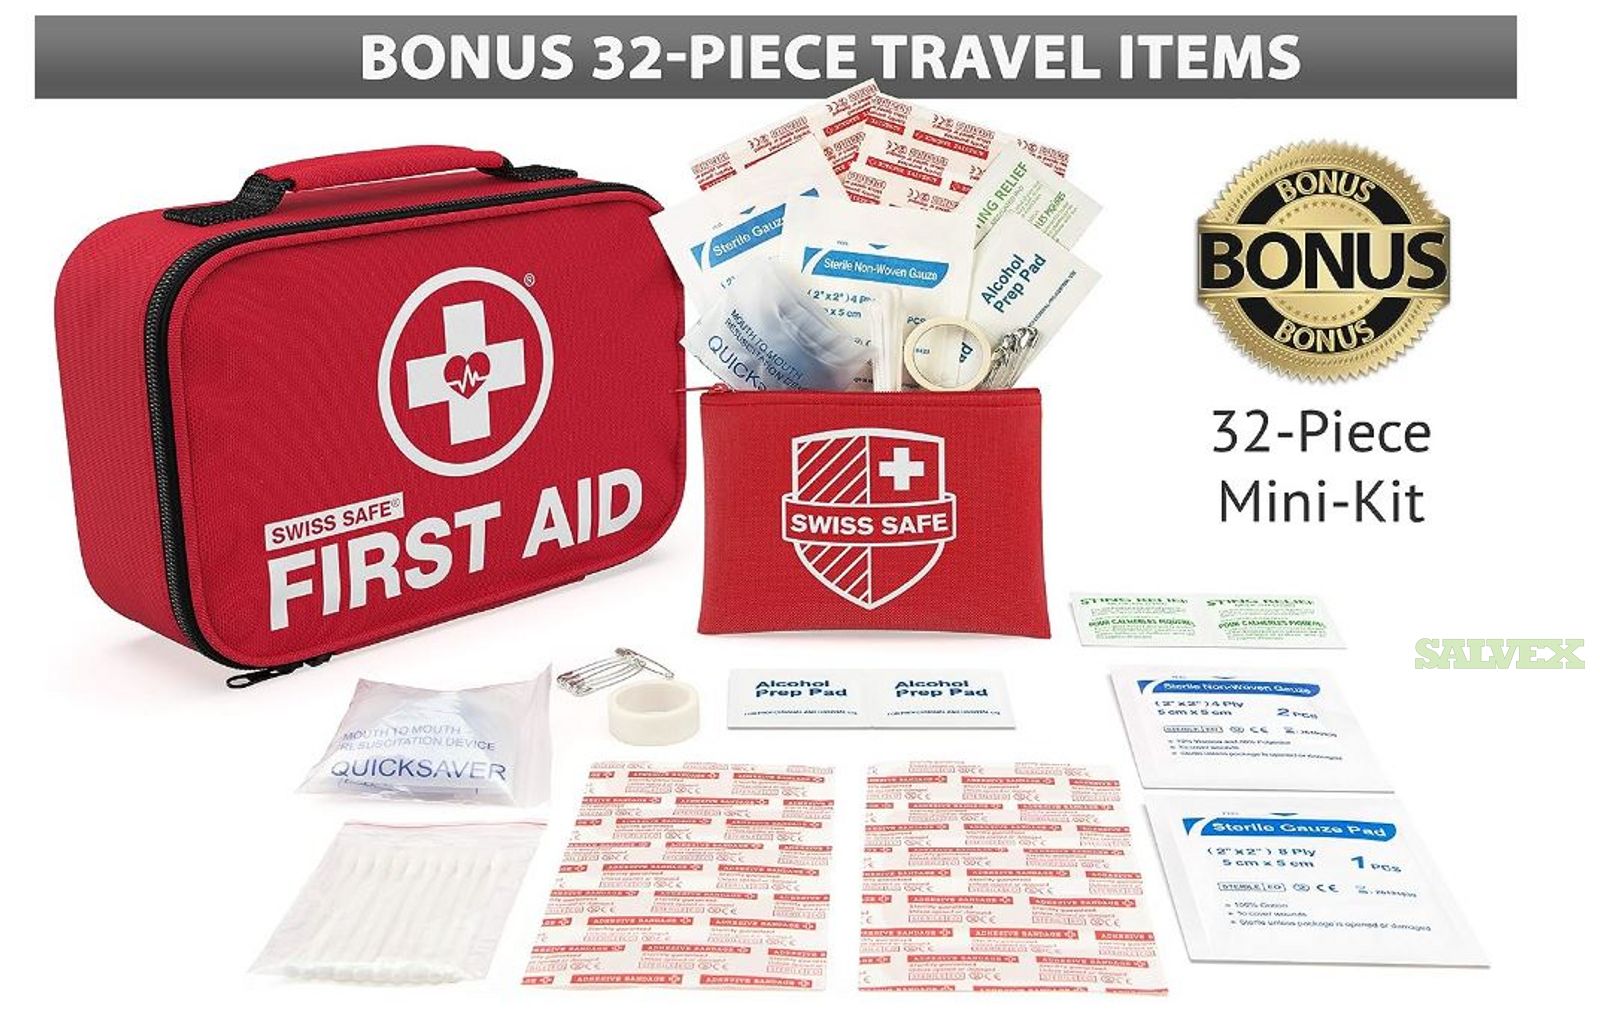 Swiss Safe Posture Correctors, First Aid Kits, And Fire Starters